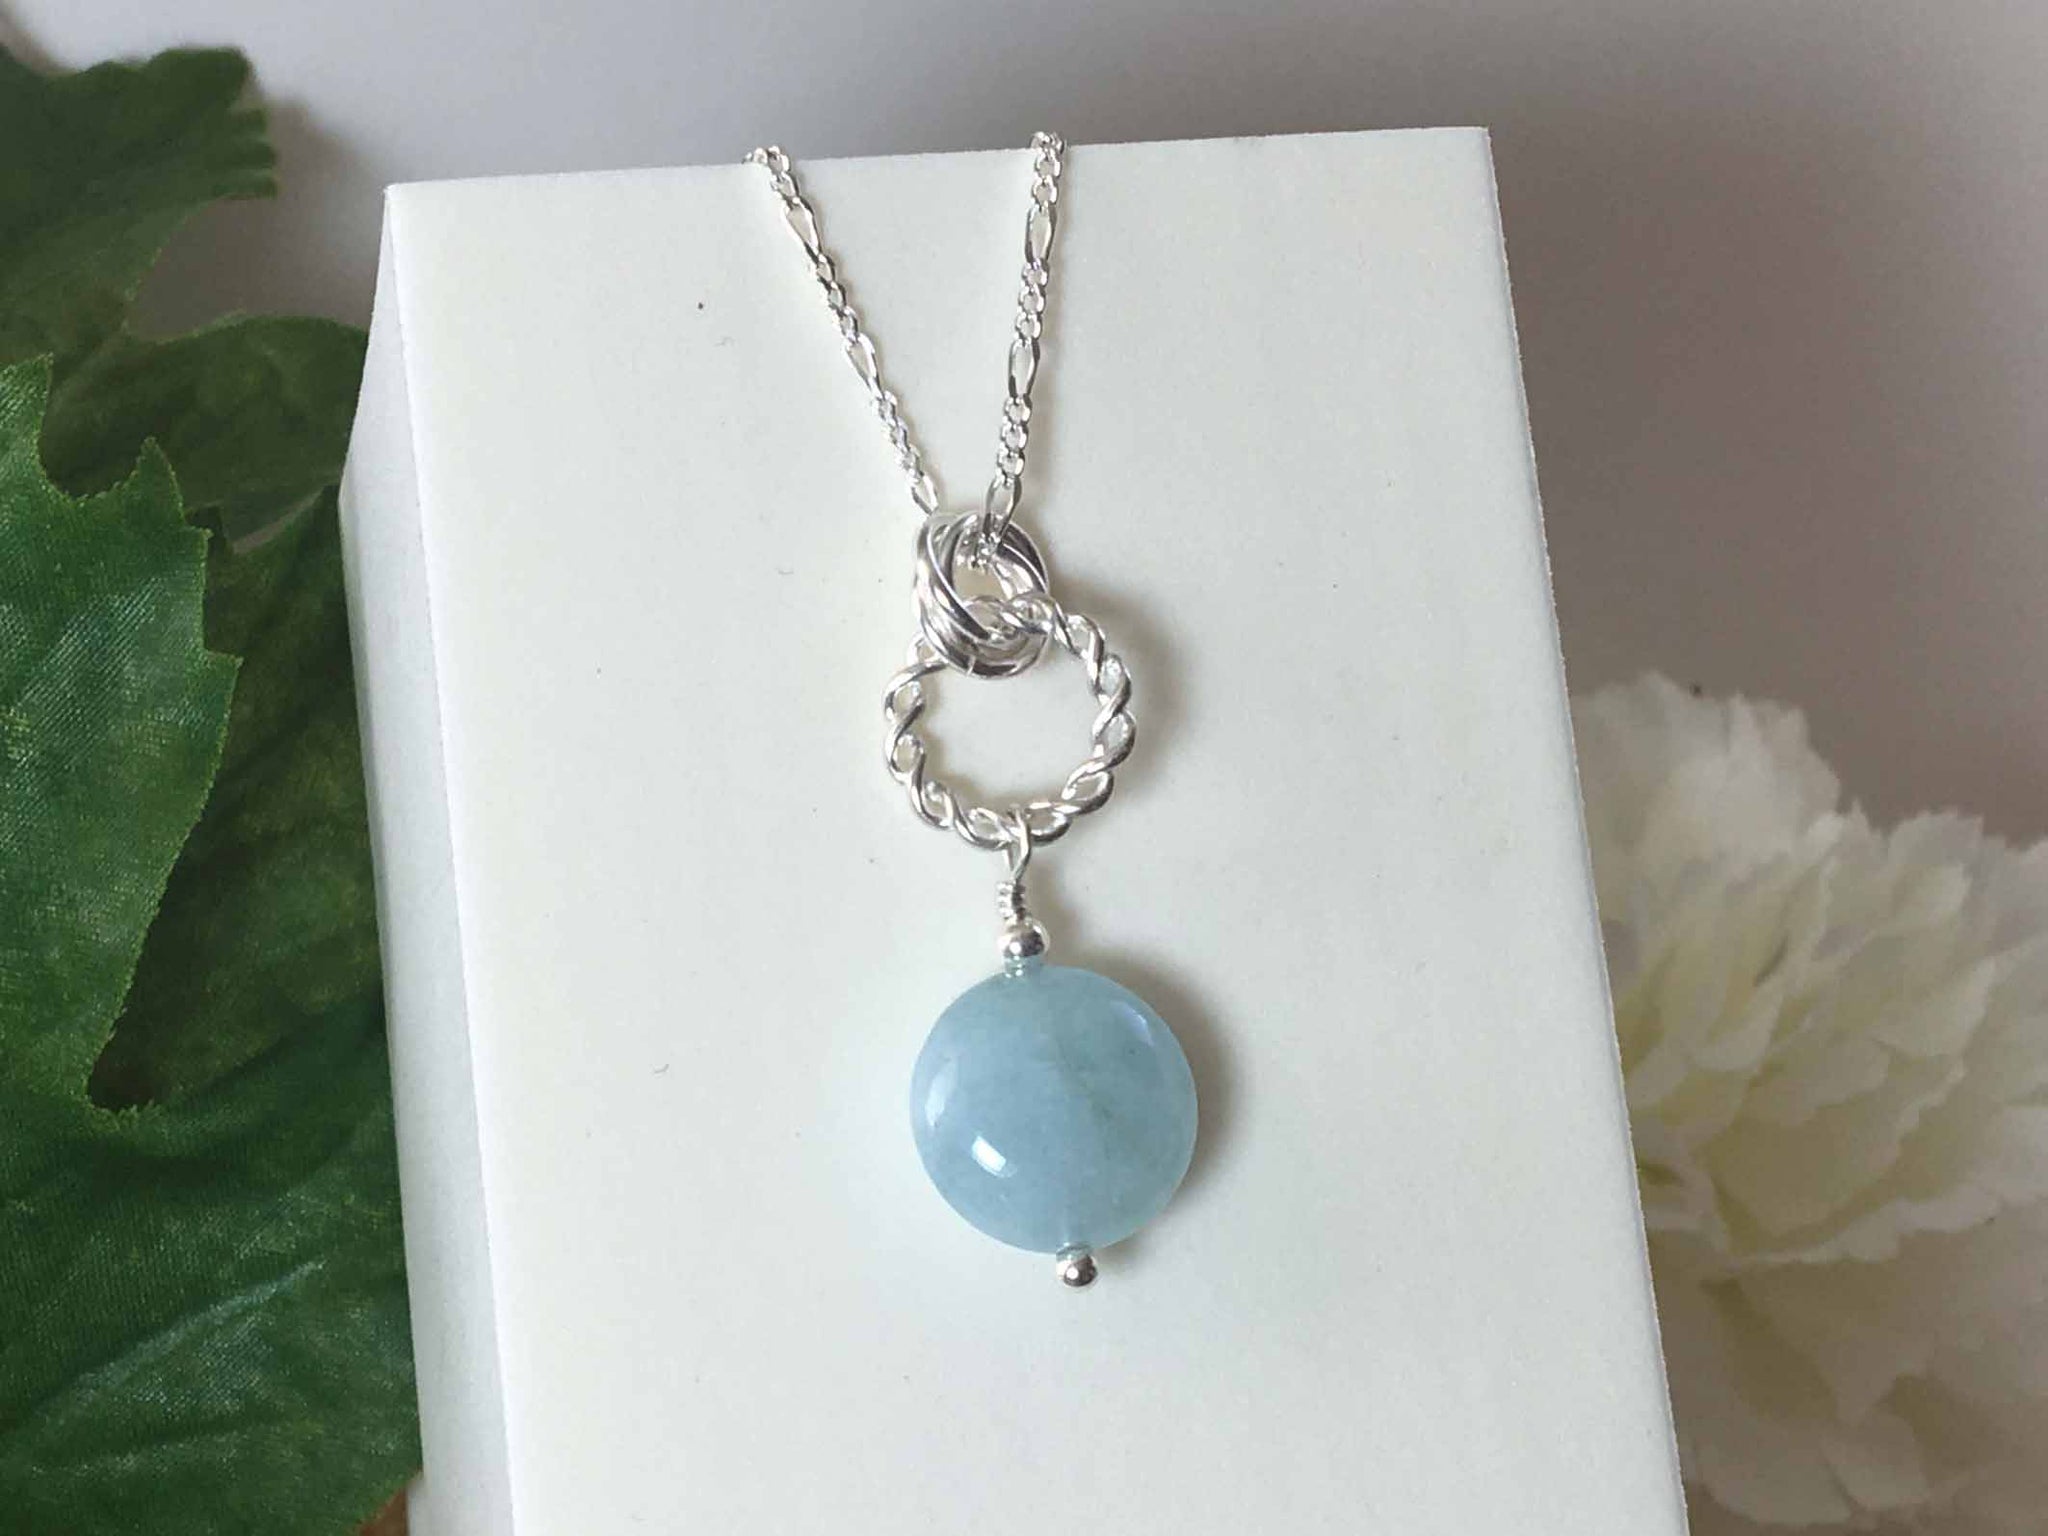 Aquamarine Mobius Sterling Silver Necklace from Jewellery by Linda